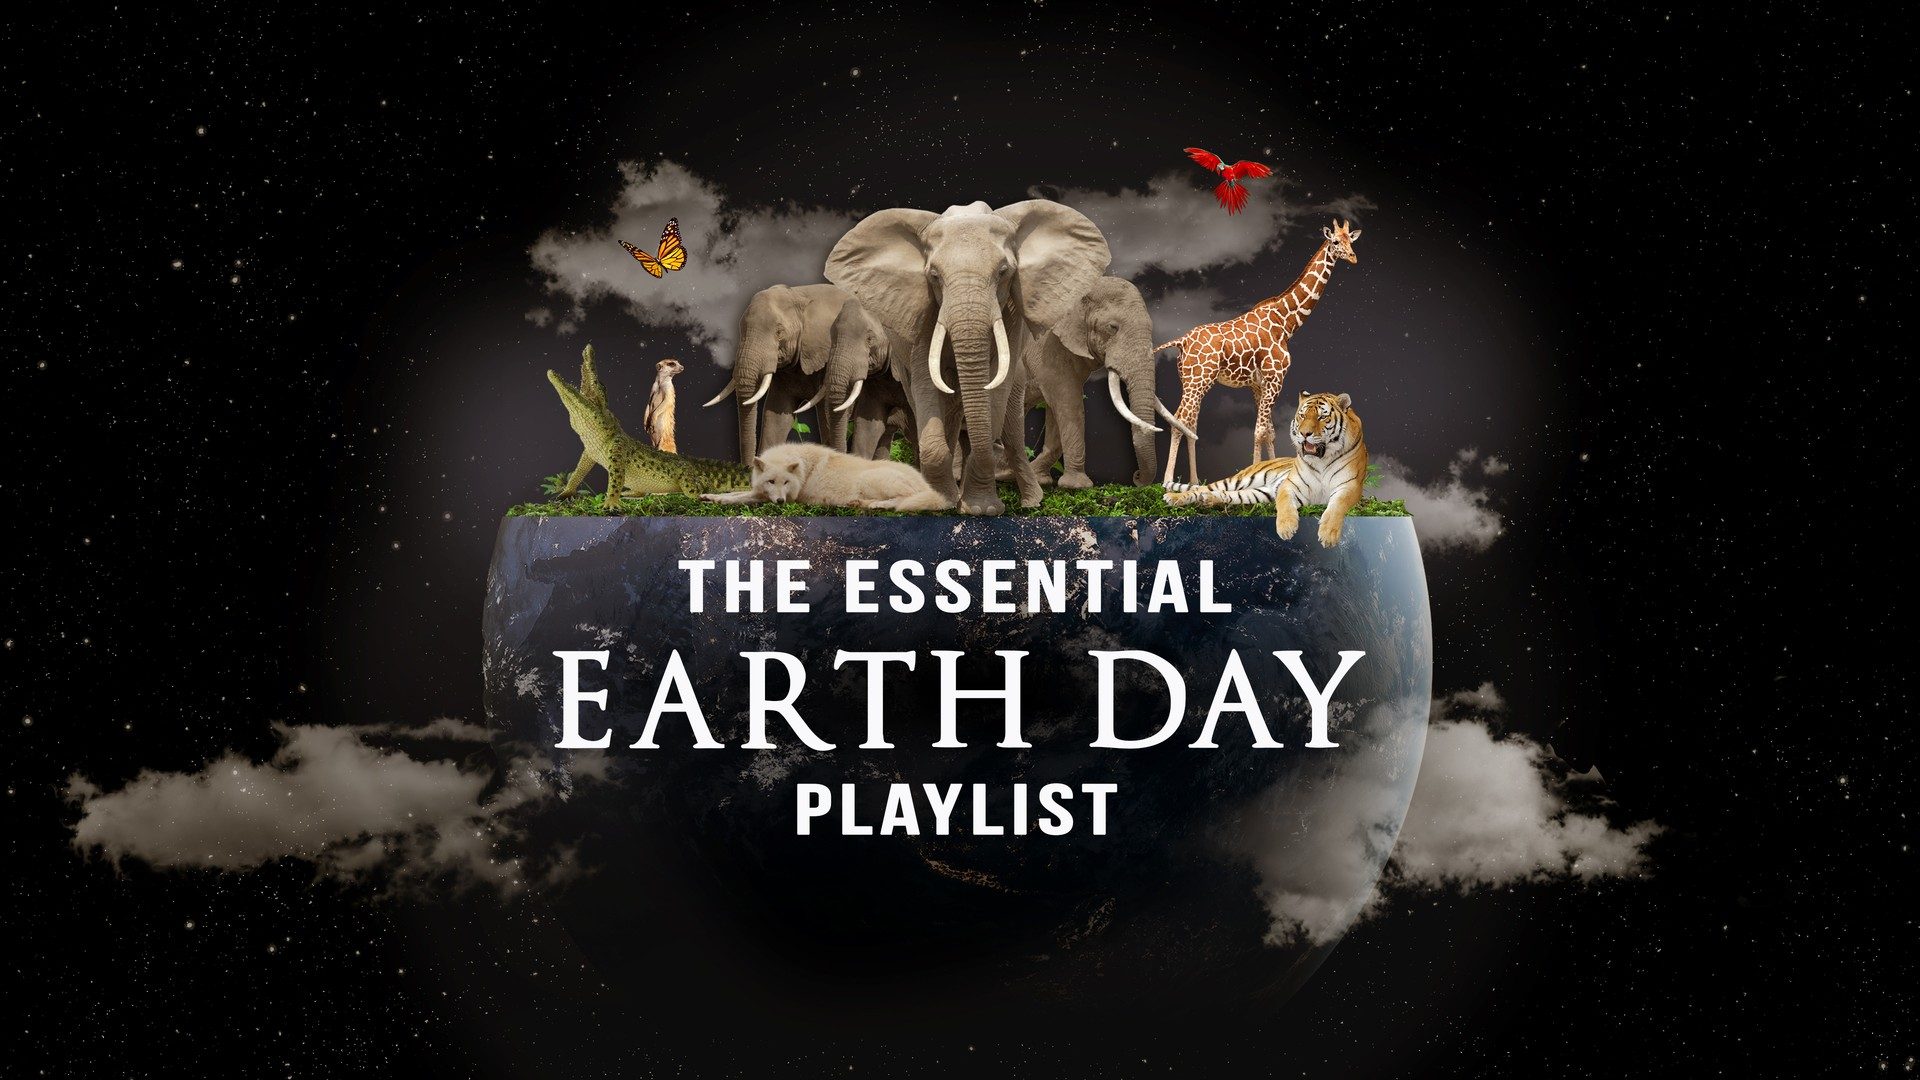 Stream These Titles Free on MagellanTV in Honor of Earth Day